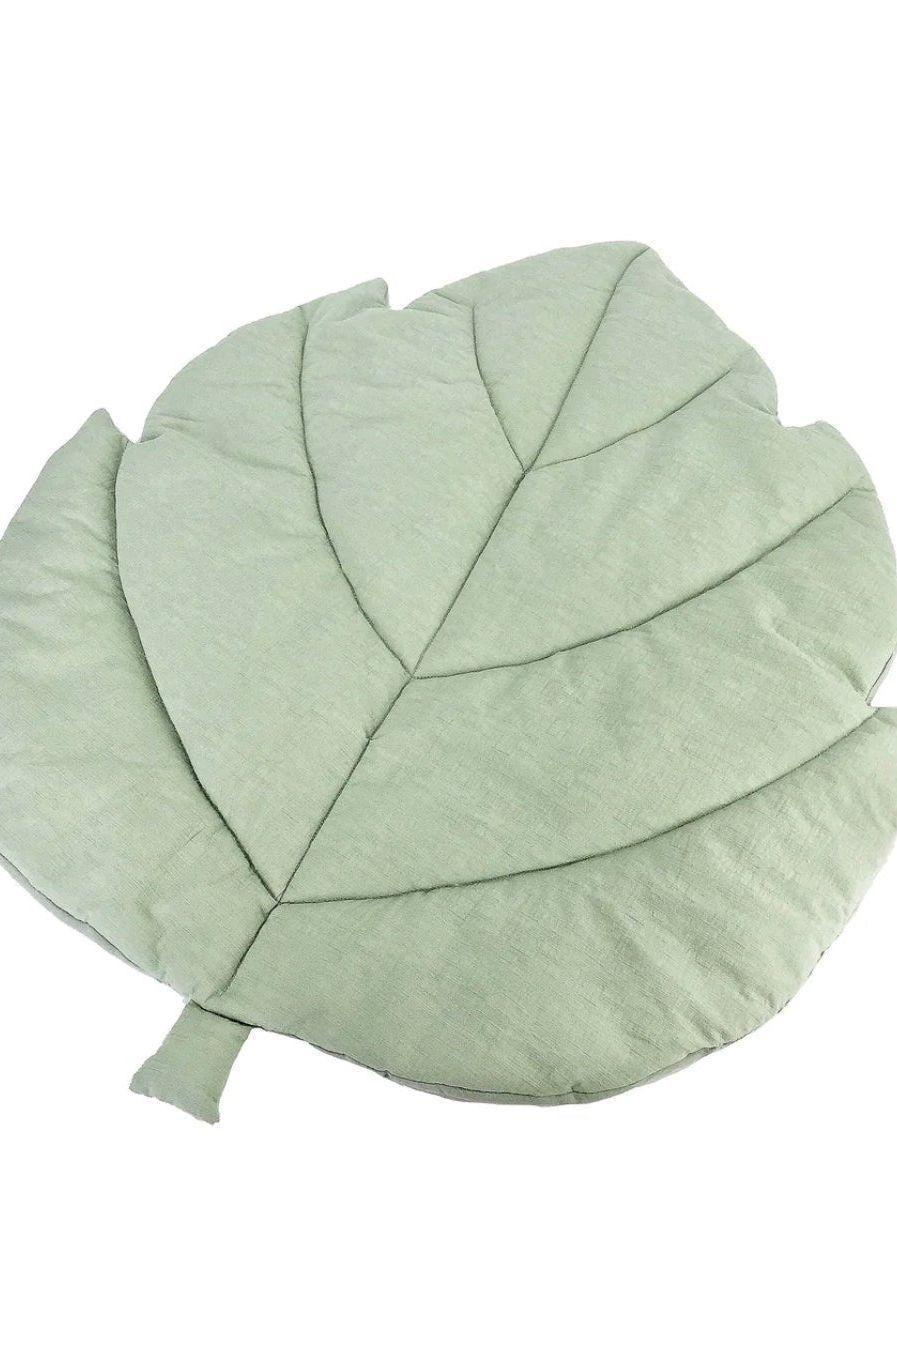 30-x-30-green-leaf-children-s-play-mat-ideal-for-tummy-time-and-play-sophia-rose-children-s-boutique - Sophia Rose Children's Boutique